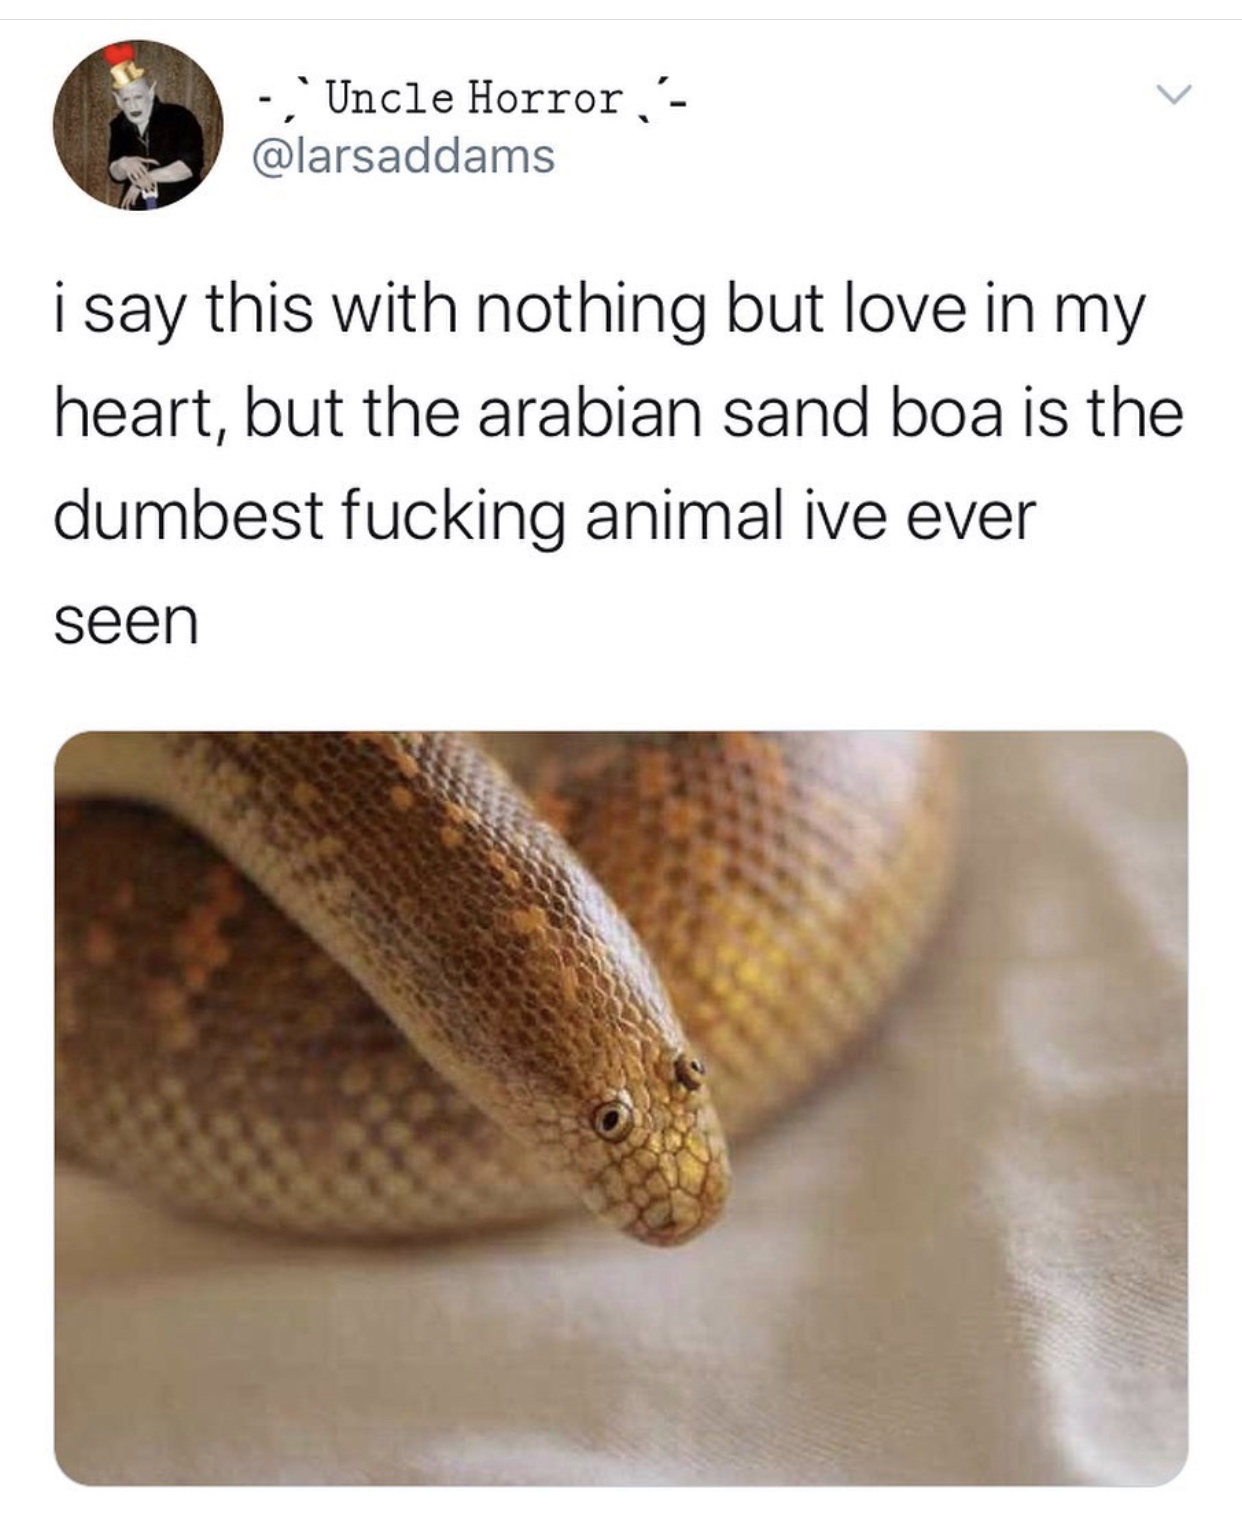 arabian sand boa - 'Uncle Horror i say this with nothing but love in my heart, but the arabian sand boa is the dumbest fucking animal ive ever seen